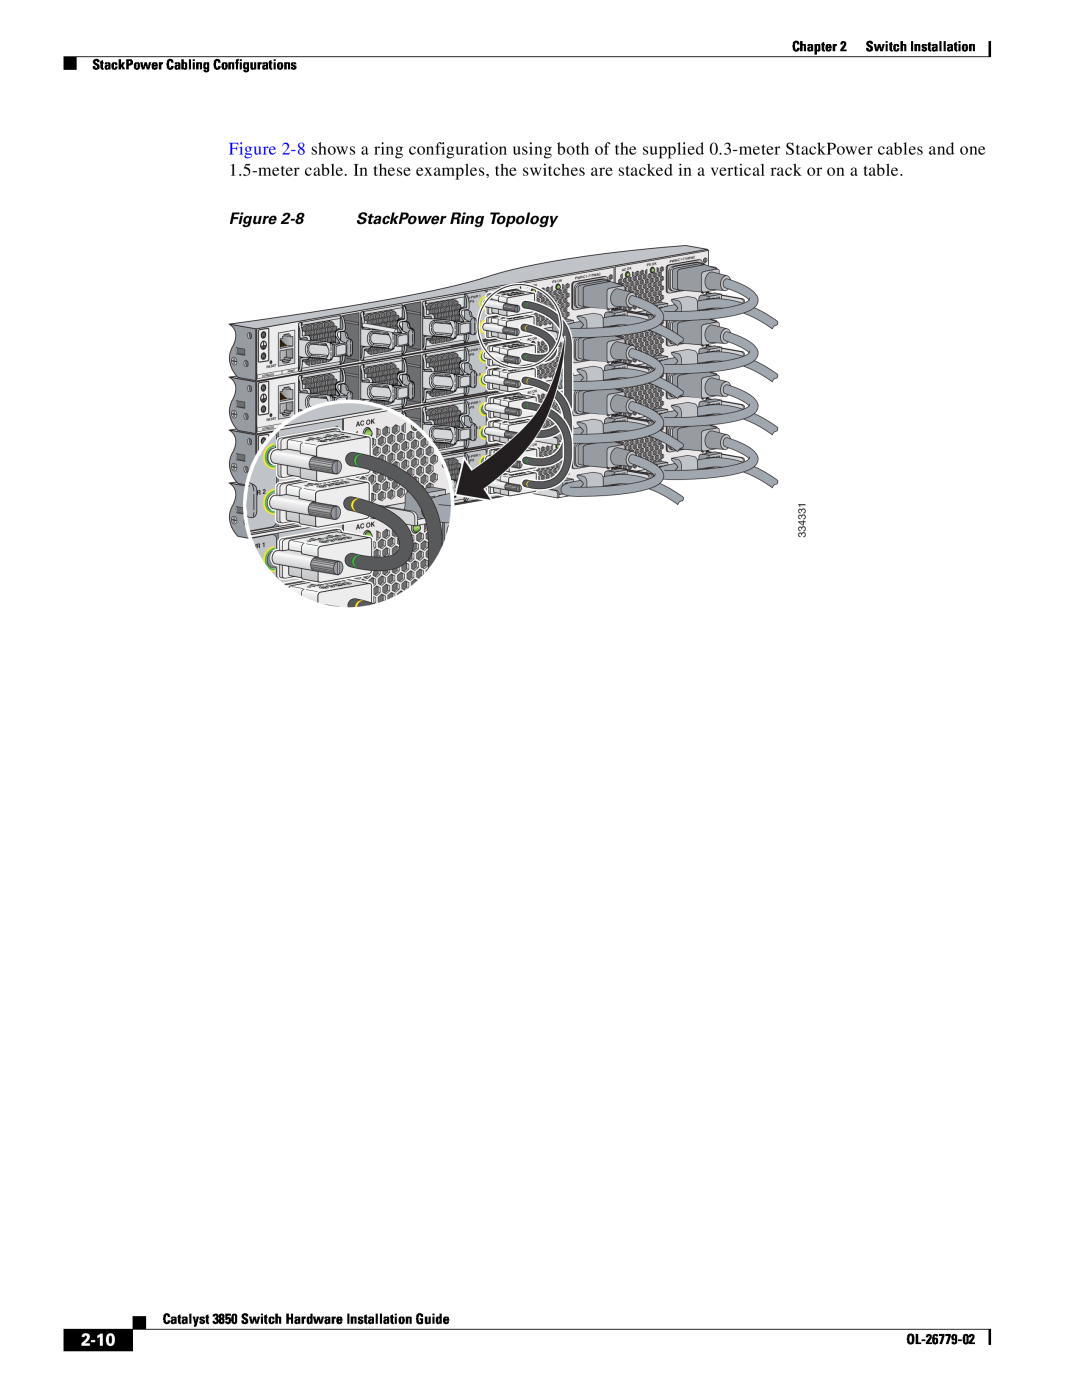 Cisco Systems C3850NM41G 2-10, StackPower Ring Topology, Switch Installation StackPower Cabling Configurations, 334331 